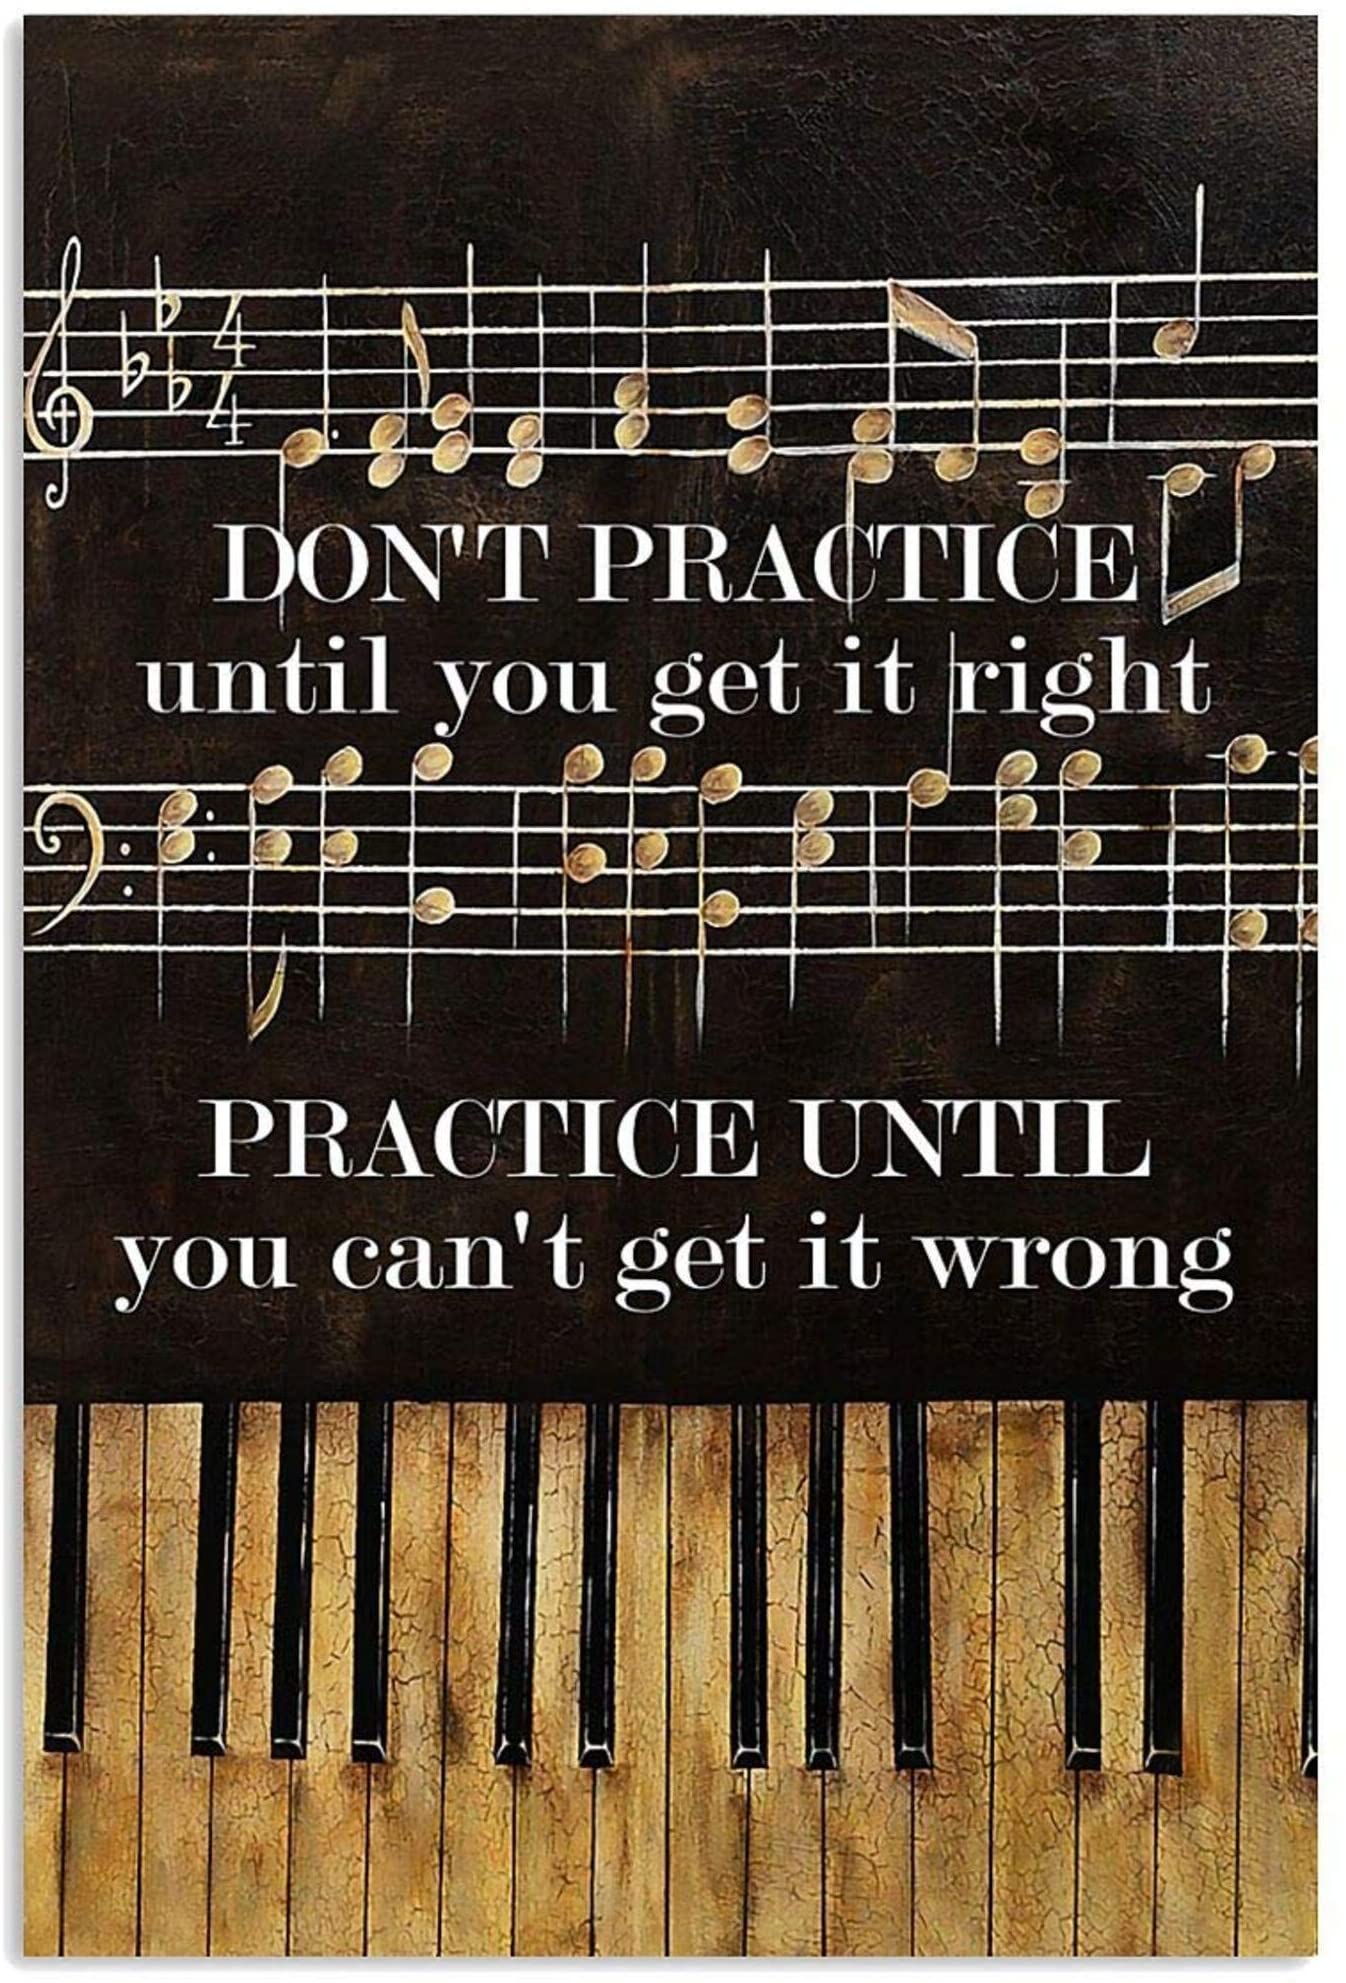 Pianist Practice Until You Cant Get It Wrong Dont Practice Until You Get It Right